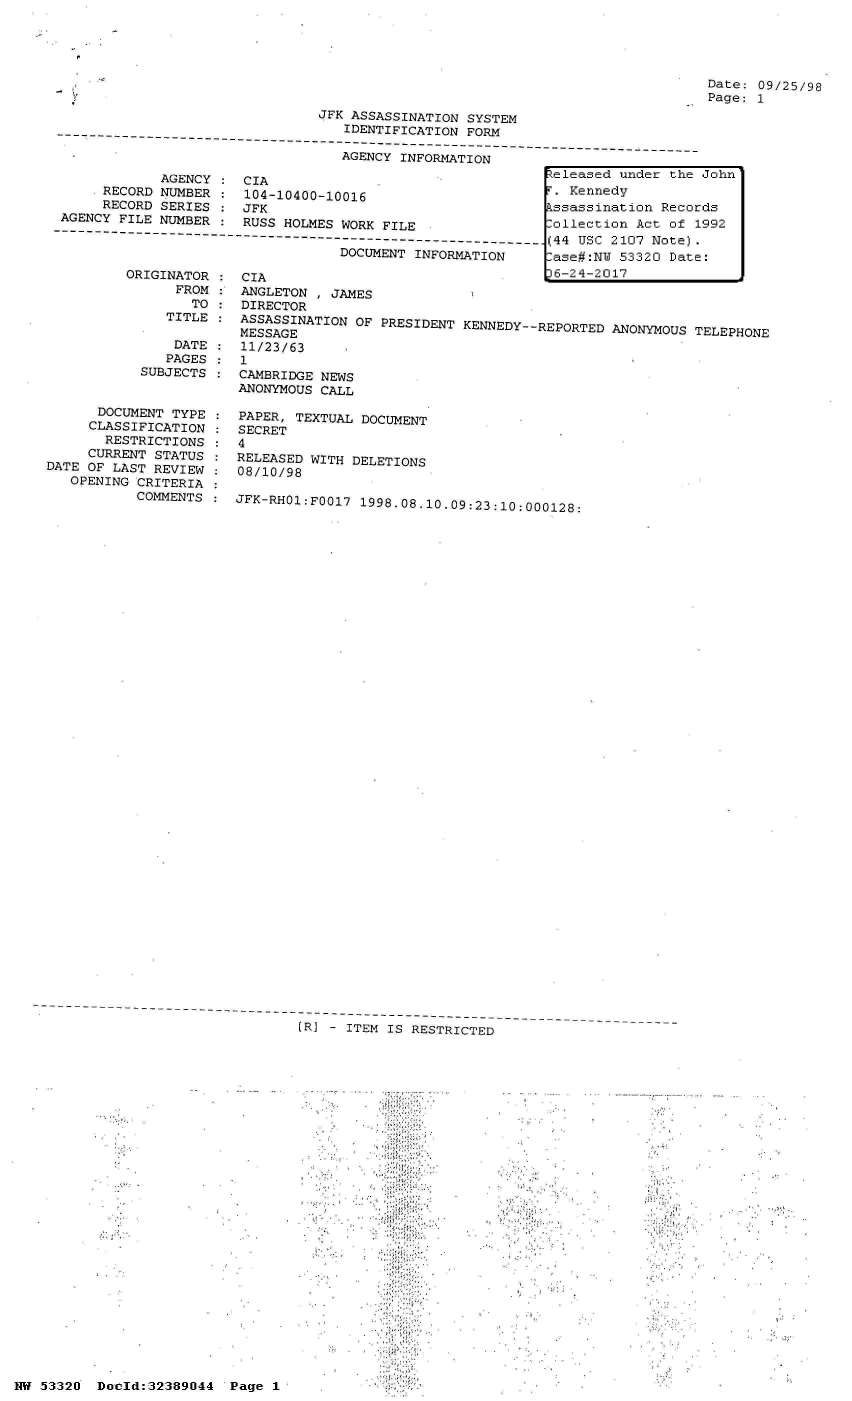 handle is hein.jfk/jfkarch06650 and id is 1 raw text is: 







                                JFK ASSASSINATION SYSTEM
                                   IDENTIFICATION FORM

                                   AGENCY INFORMATION
             AGENCY    CIA                                  7eleased under the
      RECORD NUMBER :  104-10400-10016                      T. Kennedy
      RECORD SERIES :  JFK                                  kssassination Recor
 AGENCY FILE NUMBER :  RUSS HOLMES WORK FILE  .ollection Act of 1

-       -------------------------------------------------------------(44 USC 2107 Note).
                                   DOCUMENT INFORMATION    Lase#:NW  53320 Date


          ORIGINATOR
                FROM
                  TO
               TITLE

               DATE
               PAGES
           SUBJECTS


      DOCUMENT TYPE
      CLASSIFICATION
      RESTRICTIONS
      CURRENT STATUS
DATE OF LAST REVIEW
   OPENING CRITERIA
           COMMENTS


Date: 09/25/98
Page: 1


CIA                                  po--CU1(
ANGLETON  , JAMES
DIRECTOR
ASSASSINATION  OF PRESIDENT KENNEDY--REPORTED ANONYMOUS TELEPHONE
MESSAGE
11/23/63
1
CAMBRIDGE NEWS
ANONYMOUS CALL

PAPER, TEXTUAL DOCUMENT
SECRET
4
RELEASED WITH DELETIONS
08/10/98

JFK-RH01:Fo017 1998.08.10.09:23:10:000128:


[R] - ITEM IS RESTRICTED


John'

ds
992


HW 53320  Docld:32389044  Page I


